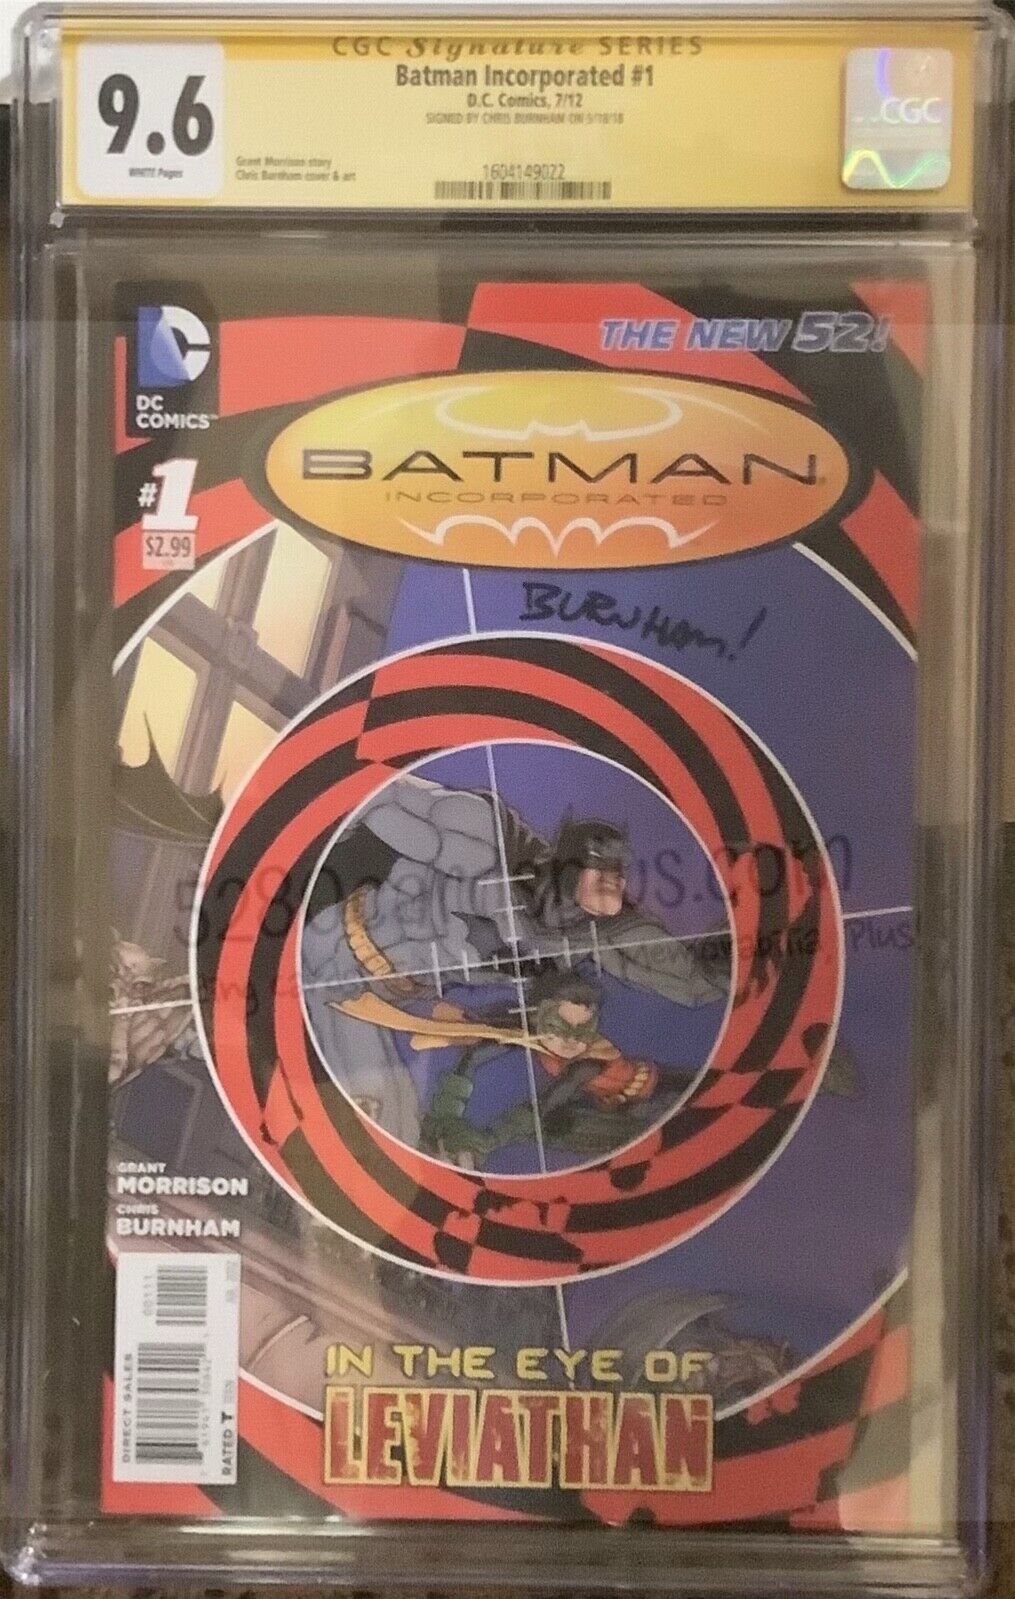 Batman Incorporated #1 The New 52! 07/12 CGC 9.6 Signed by Chris Burnham